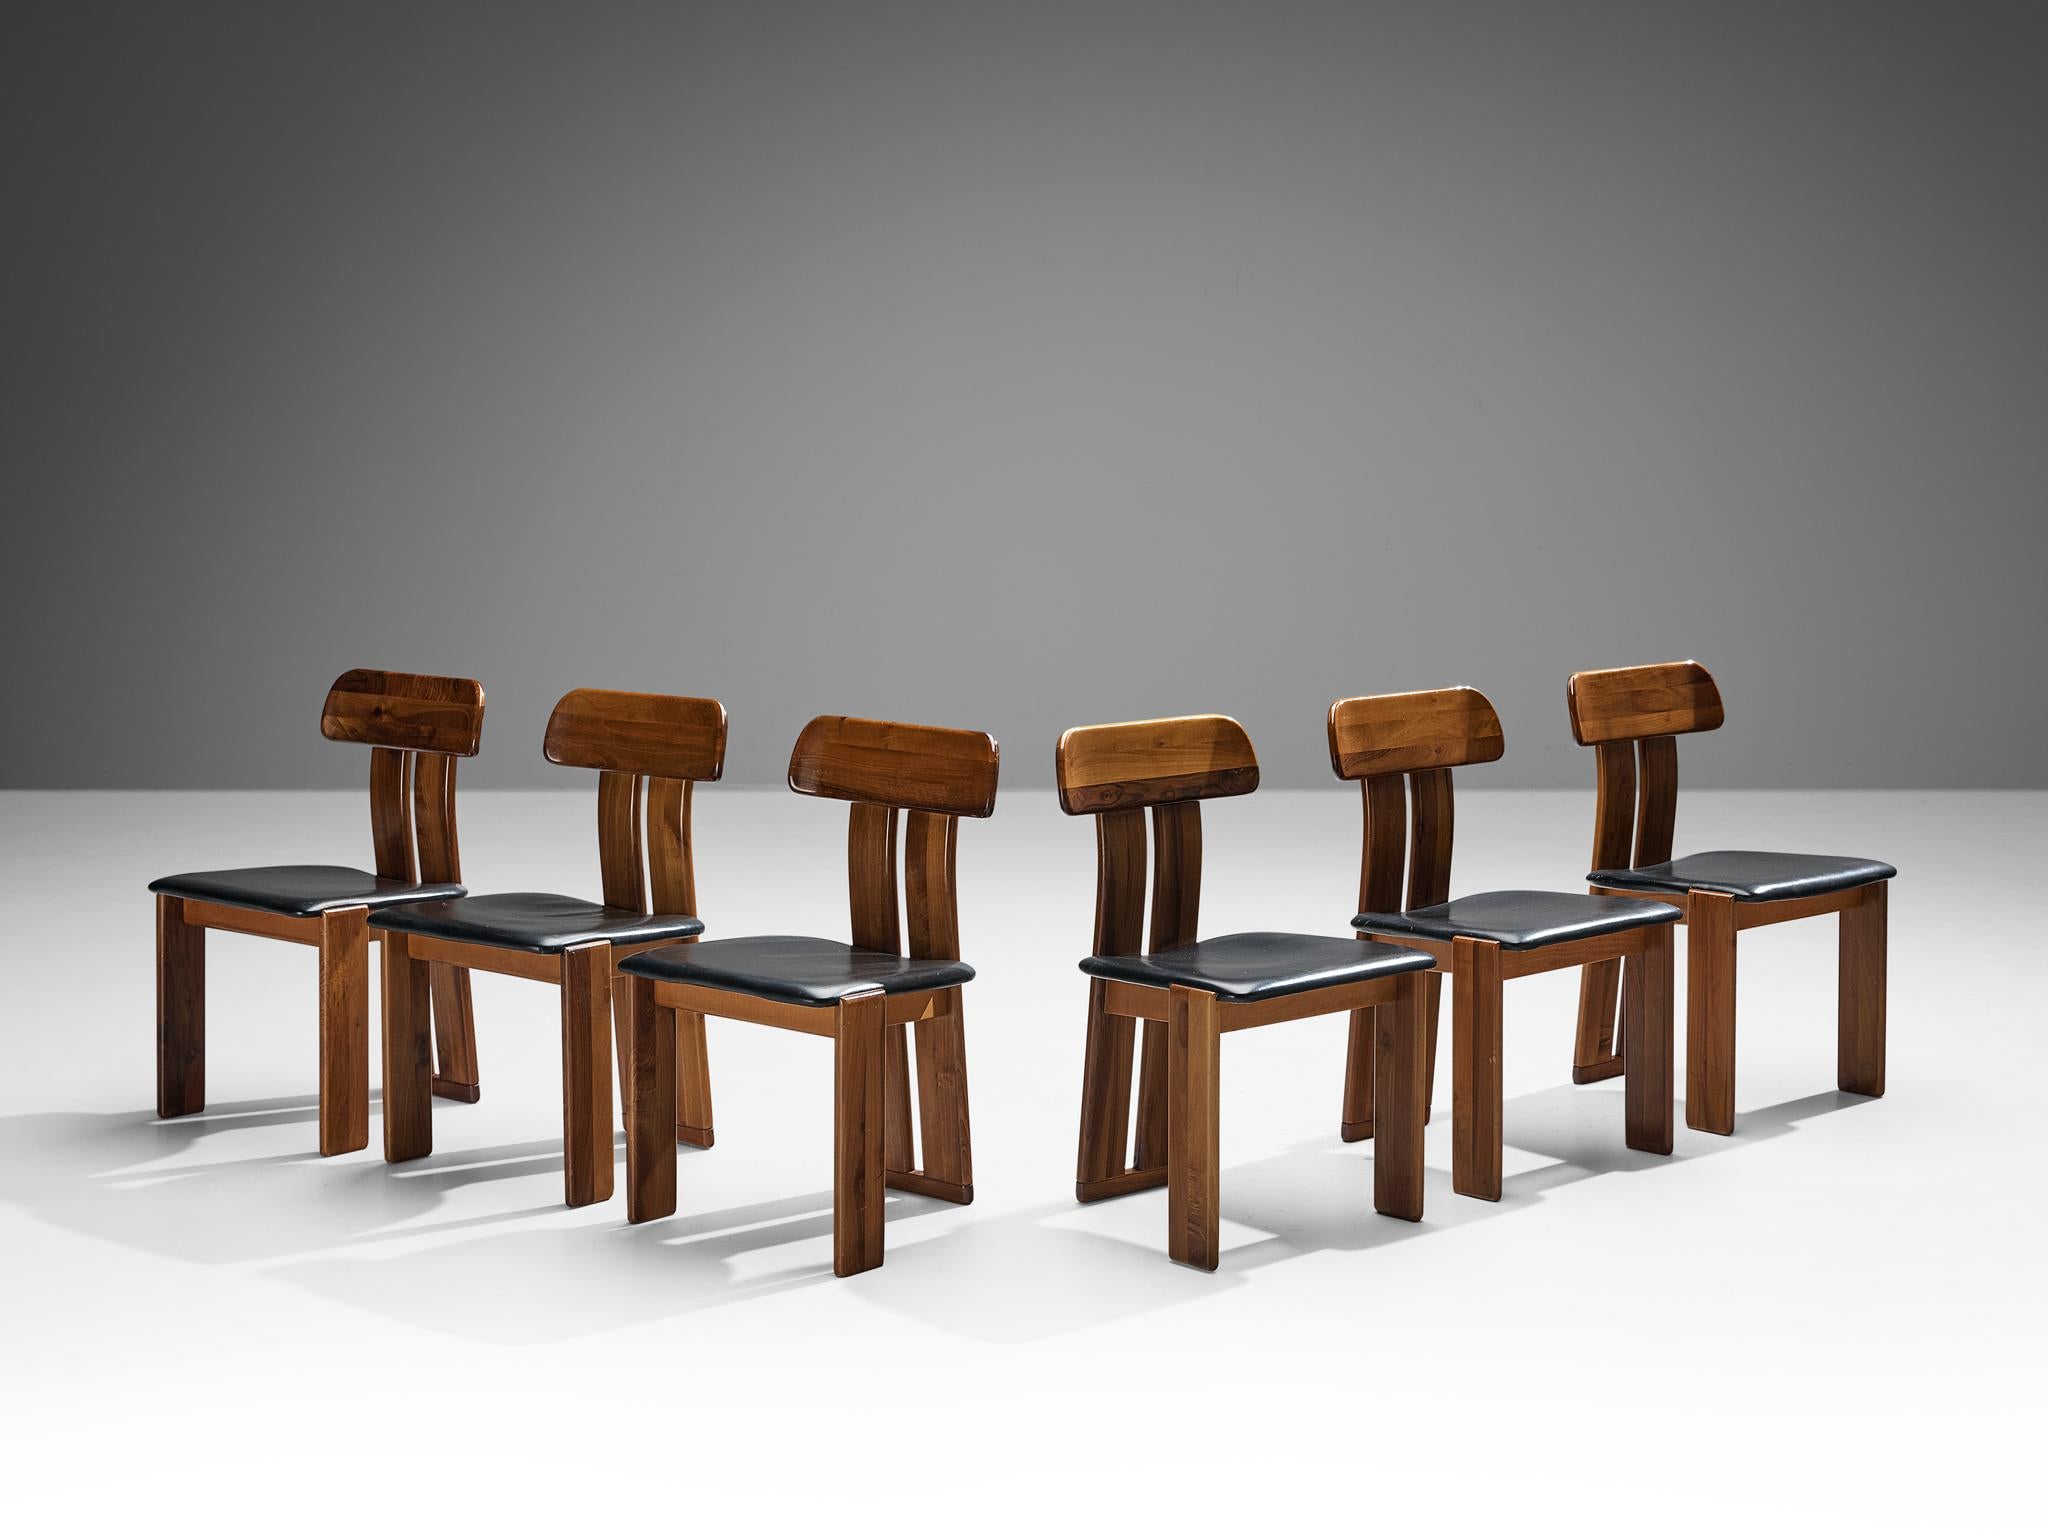 Mario Marenco for Mobil Girgi, set of six dining chairs model ‘Sapporo’, walnut, black leather, Italy, 1970s

Beautiful set of six dining chairs in walnut and black leather designed by Mario Marenco in the 1970s. These chairs feature wonderful